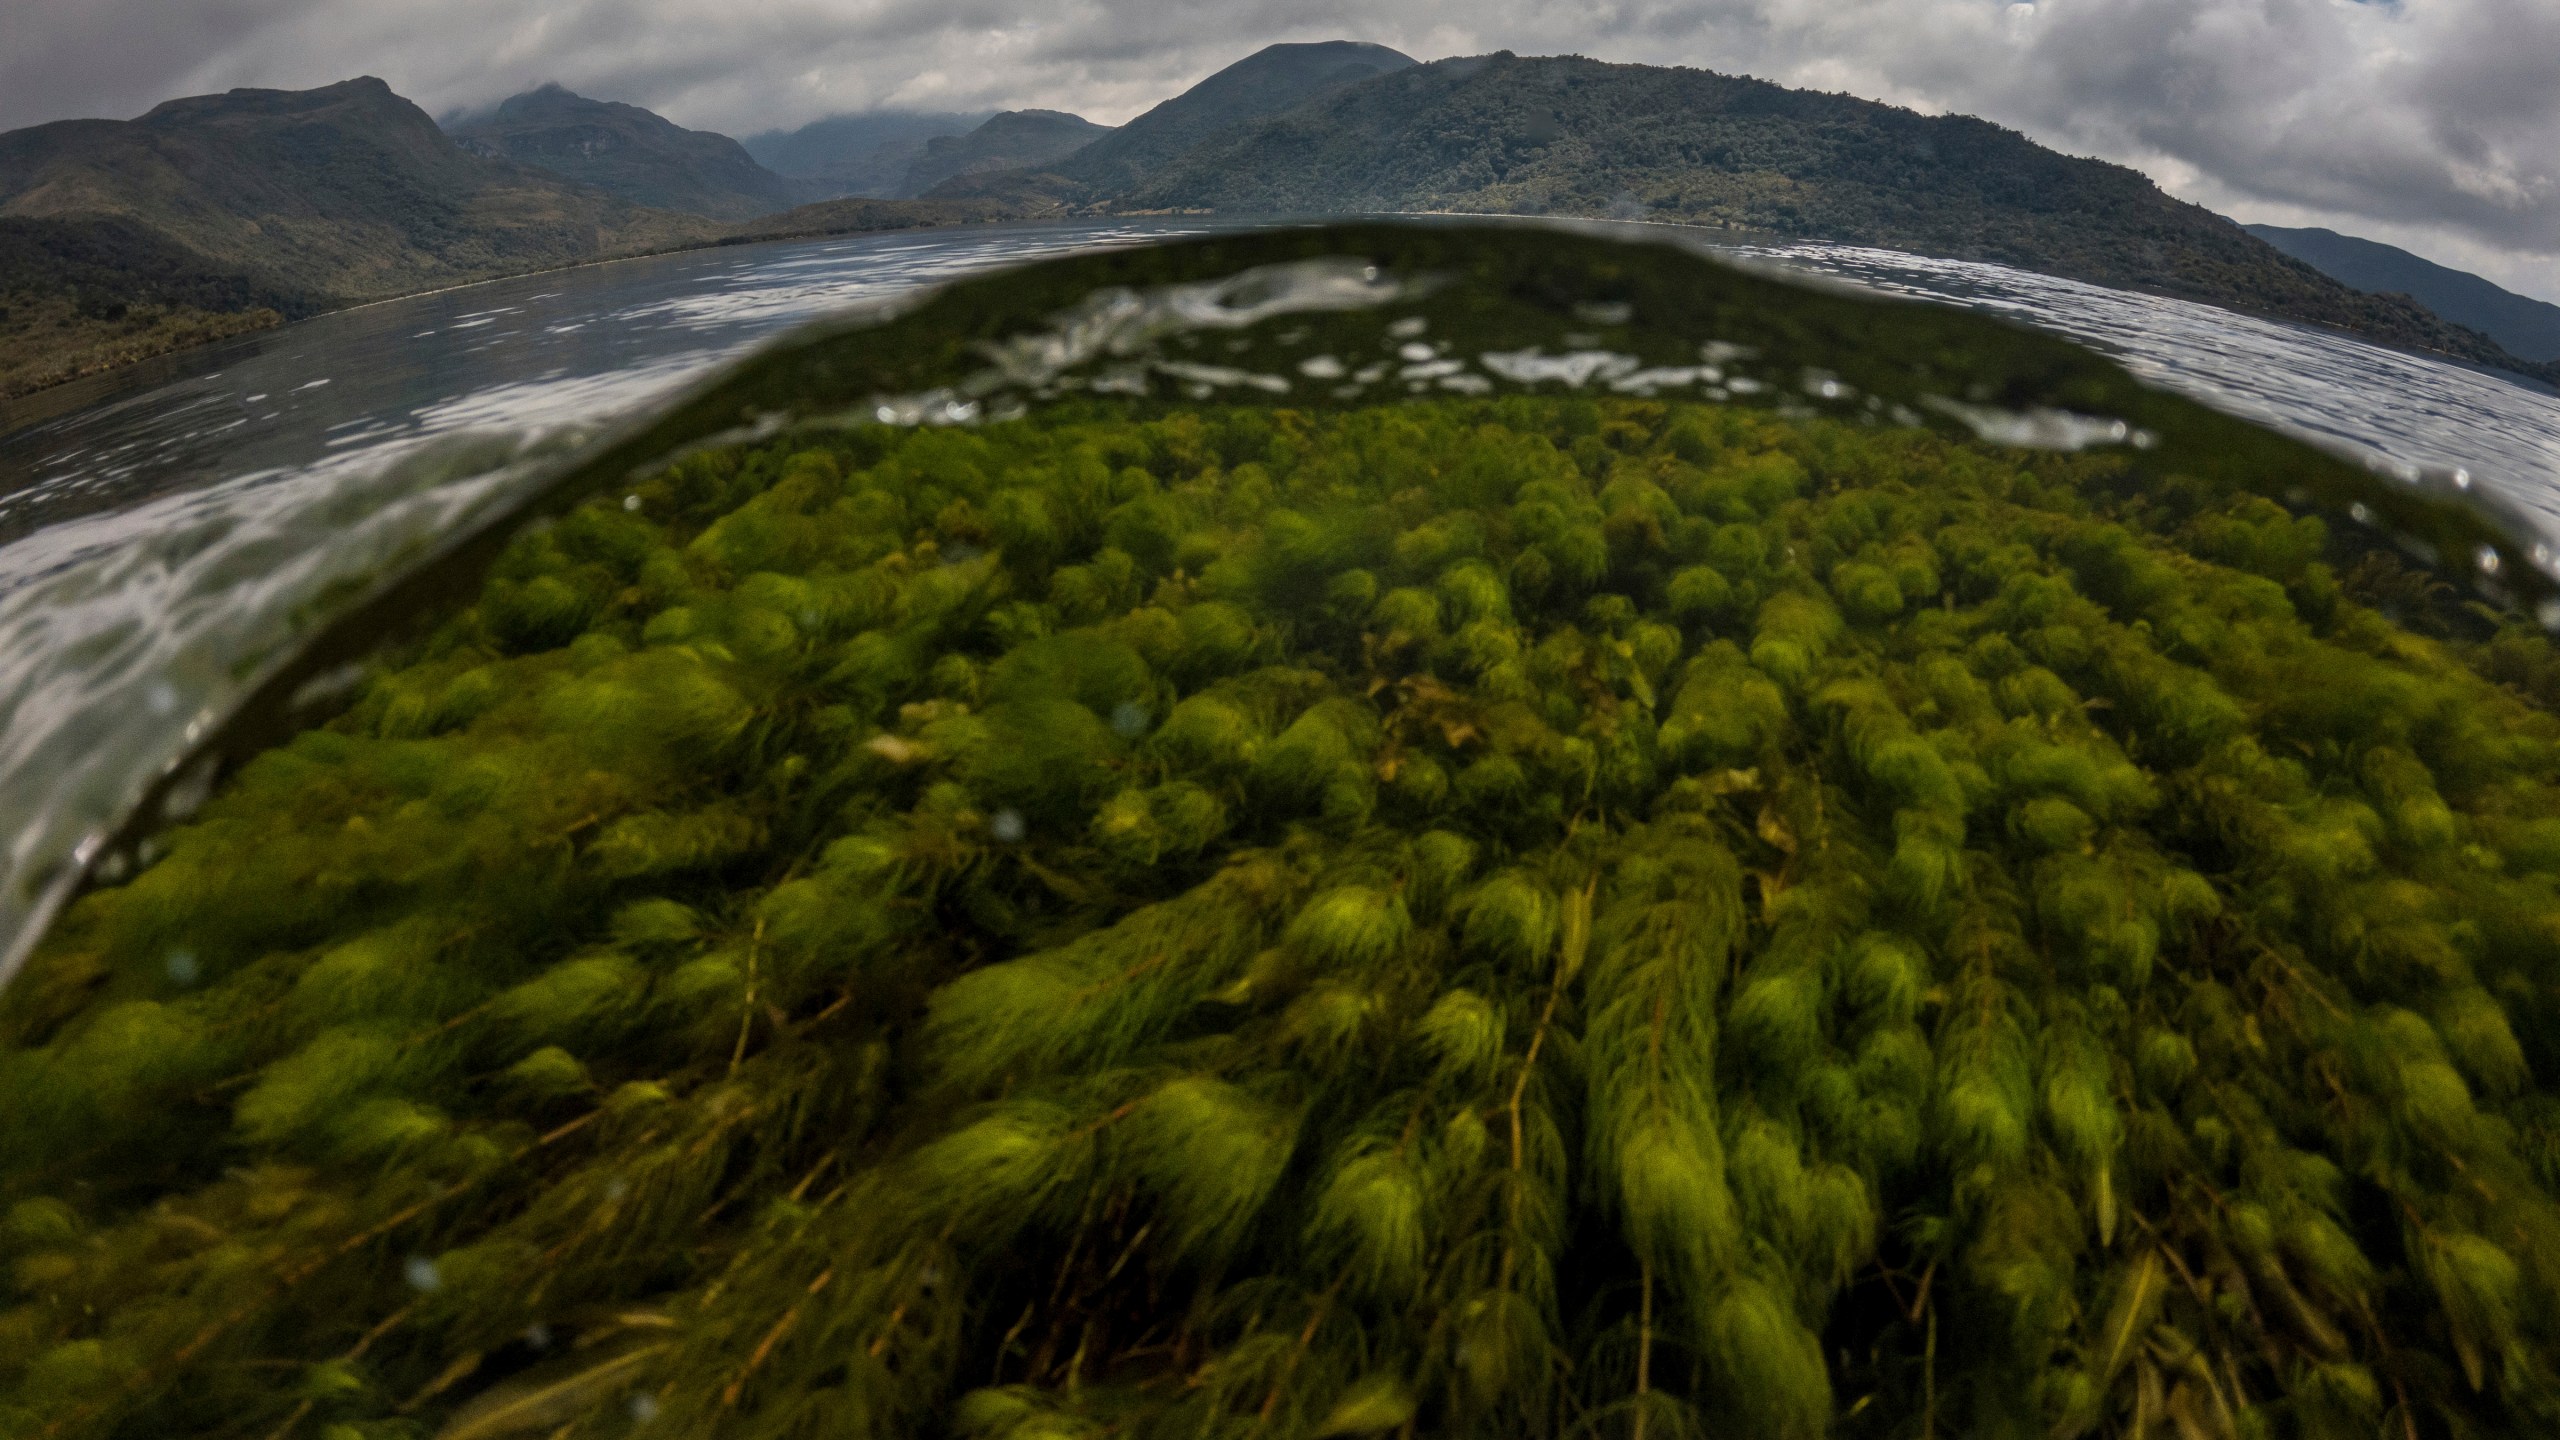 FILE - This photo captured partially underwater reveals submerged vegetation at the Chingaza lagoon in the paramo of Chingaza National Natural Park, Colombia, Tuesday, March 19, 2024, the primary water source for millions of residents in the capital city of Bogota. Bogota's main source of water, the Chingaza Reservoir System, is currently 15% full. (AP Photo/Ivan Valencia, File)